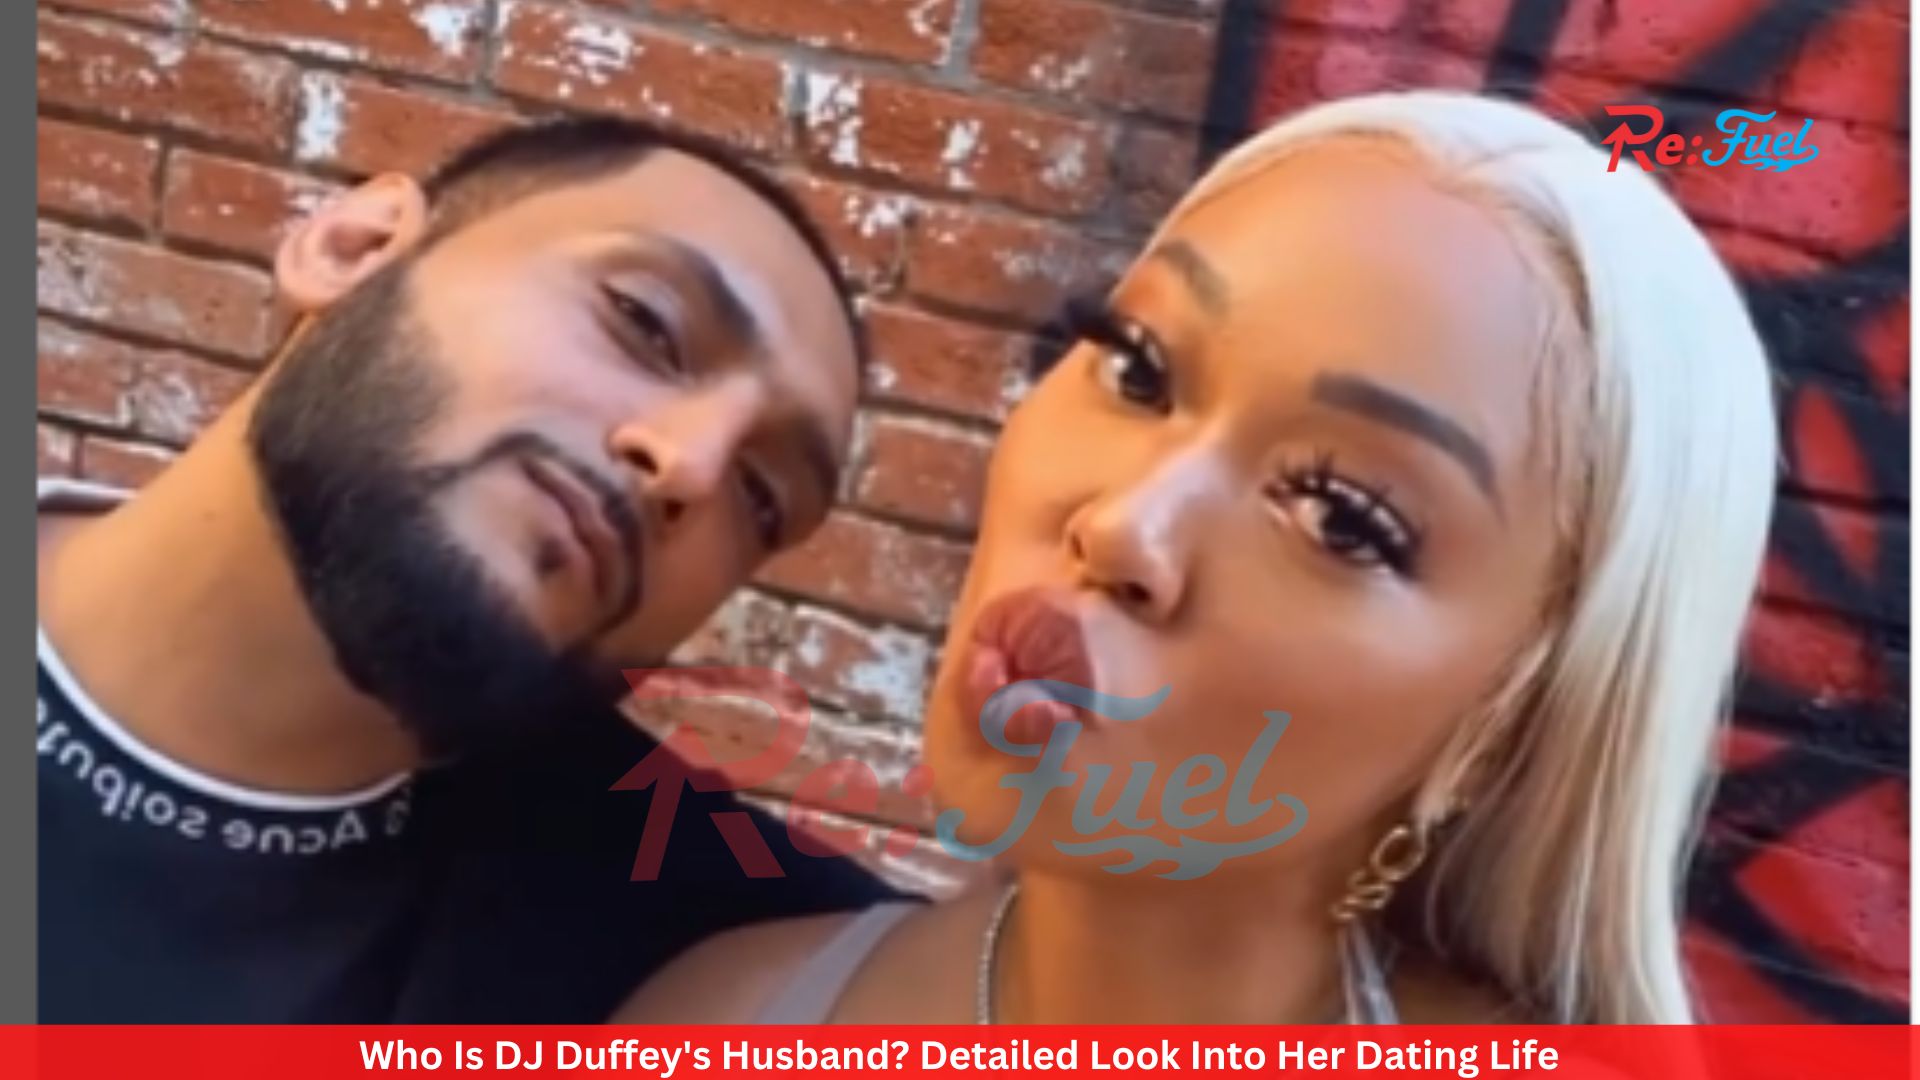 Who Is DJ Duffey's Husband? Detailed Look Into Her Dating Life